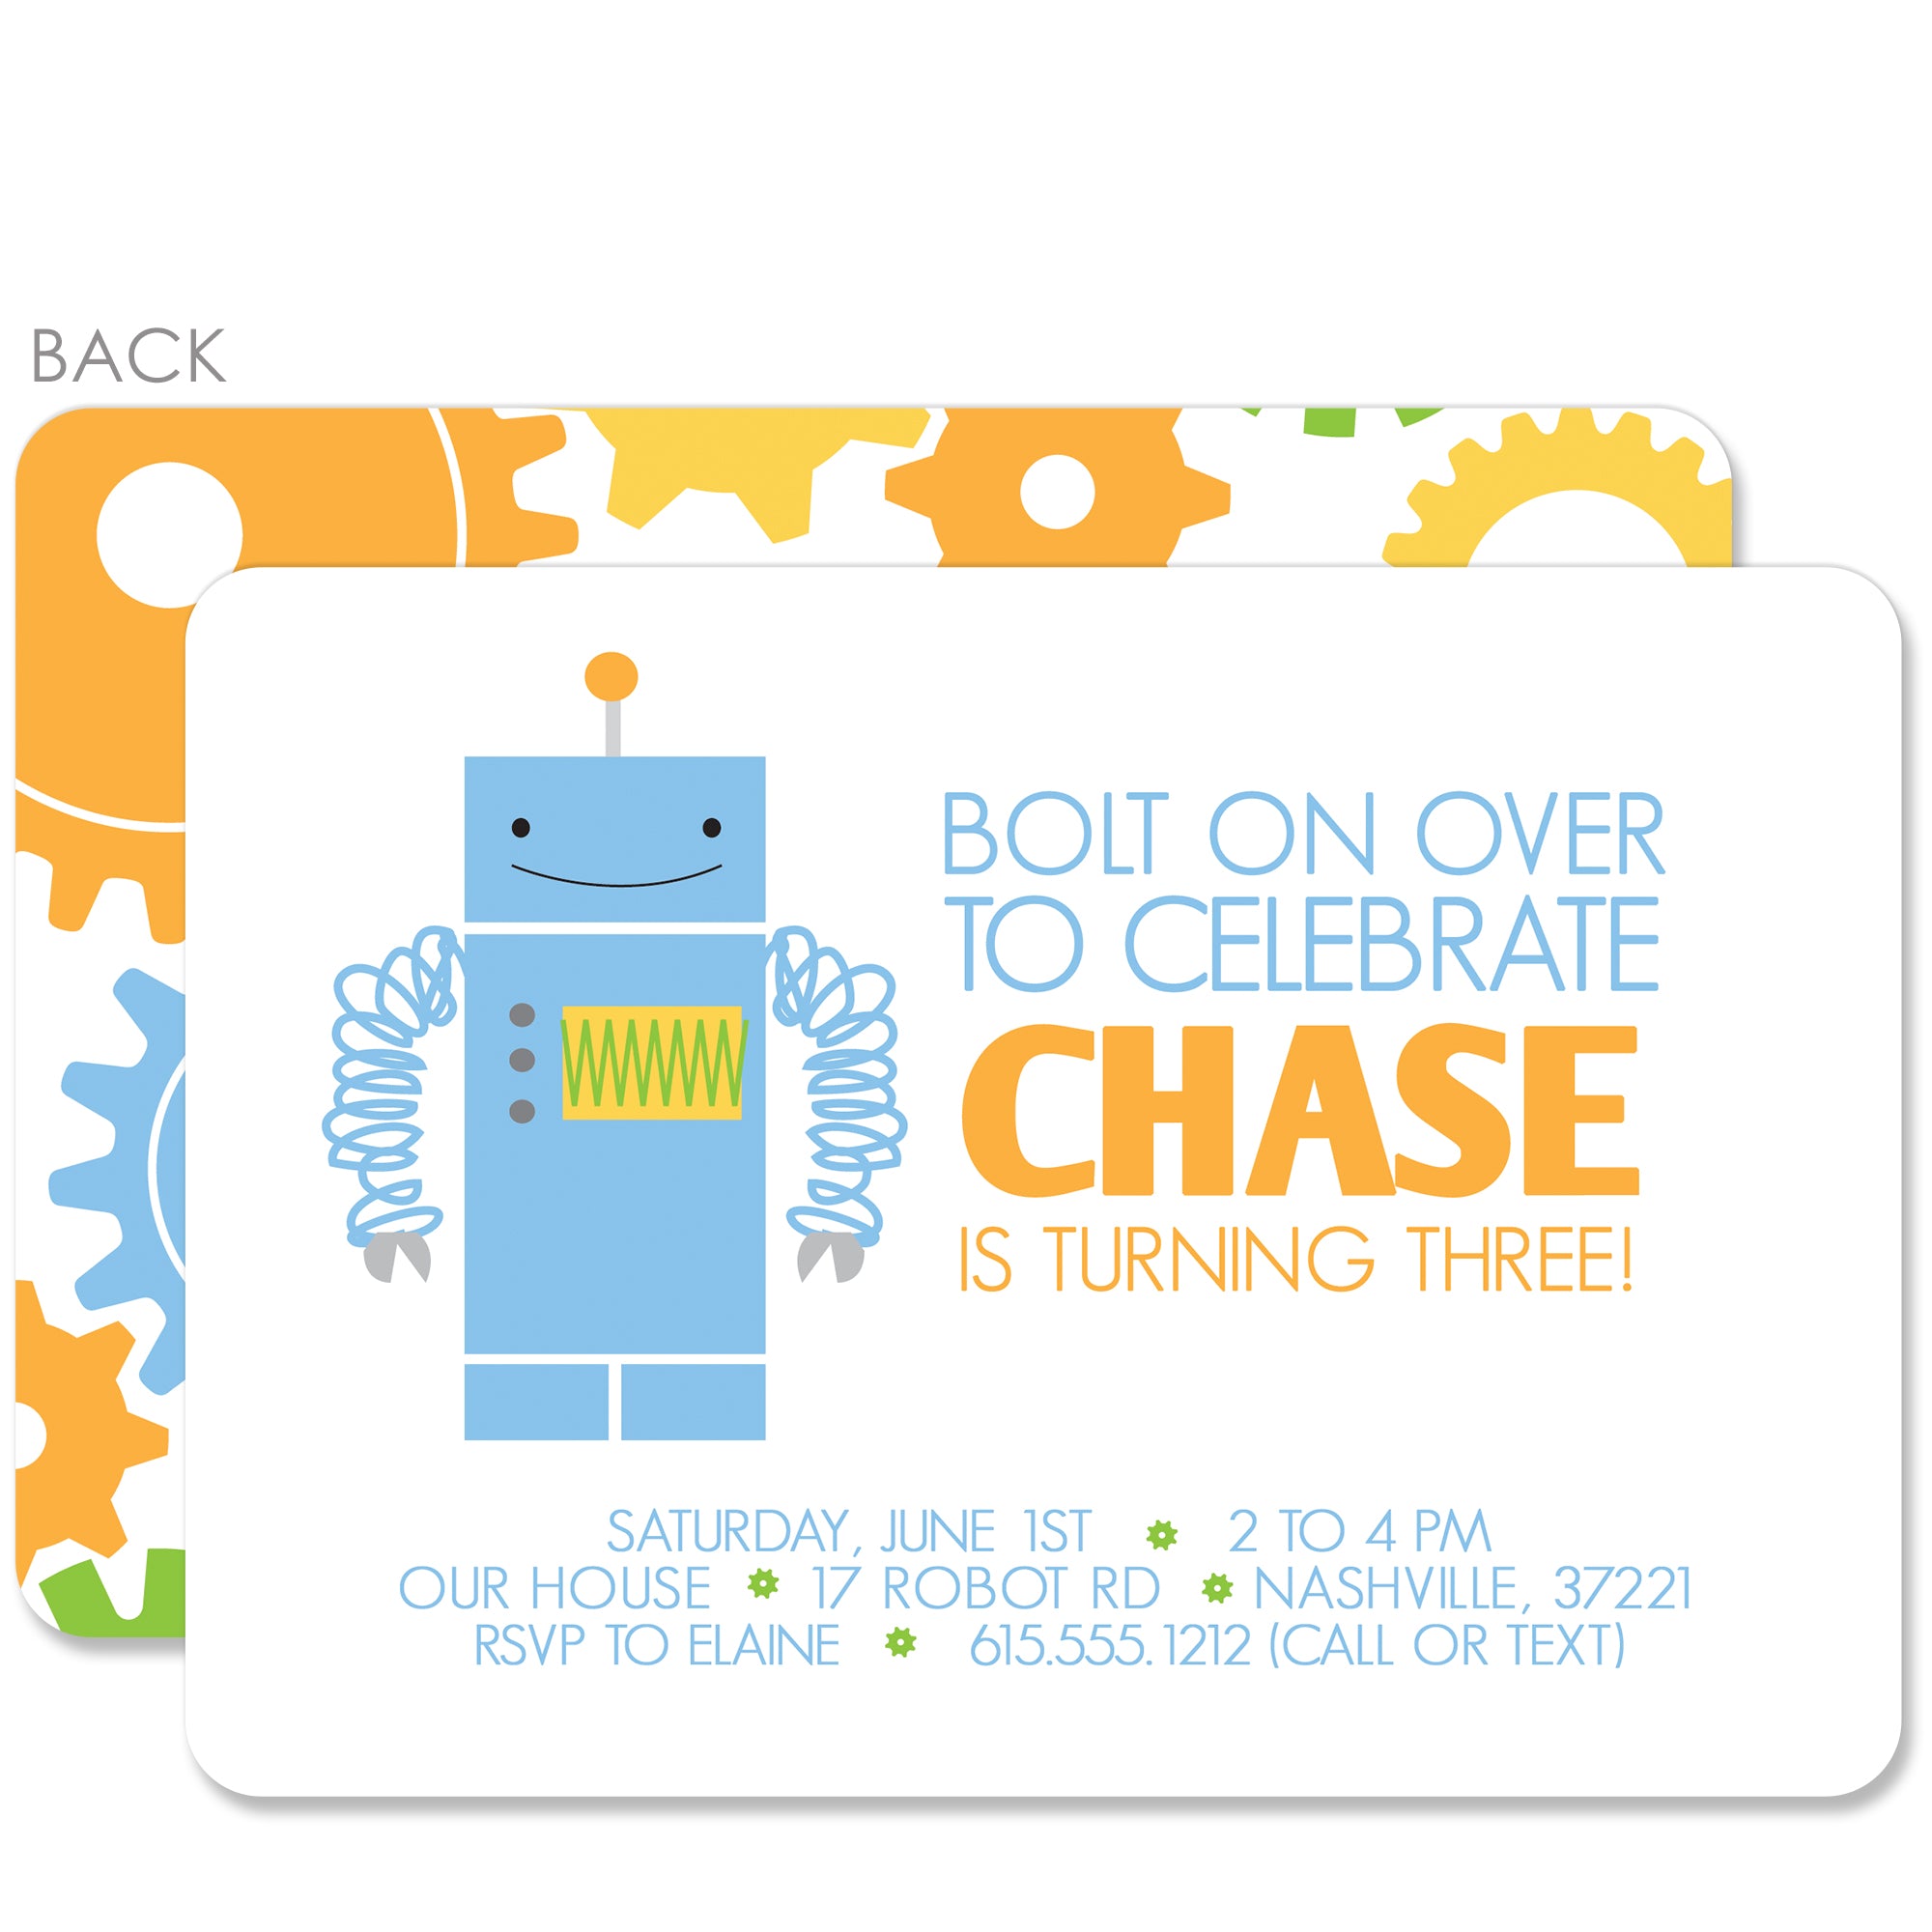 Robot birthday invitation with a gear pattern on the back, printed on thick cardstock with 2 sided printing, envelopes included. Can be made in any color scheme